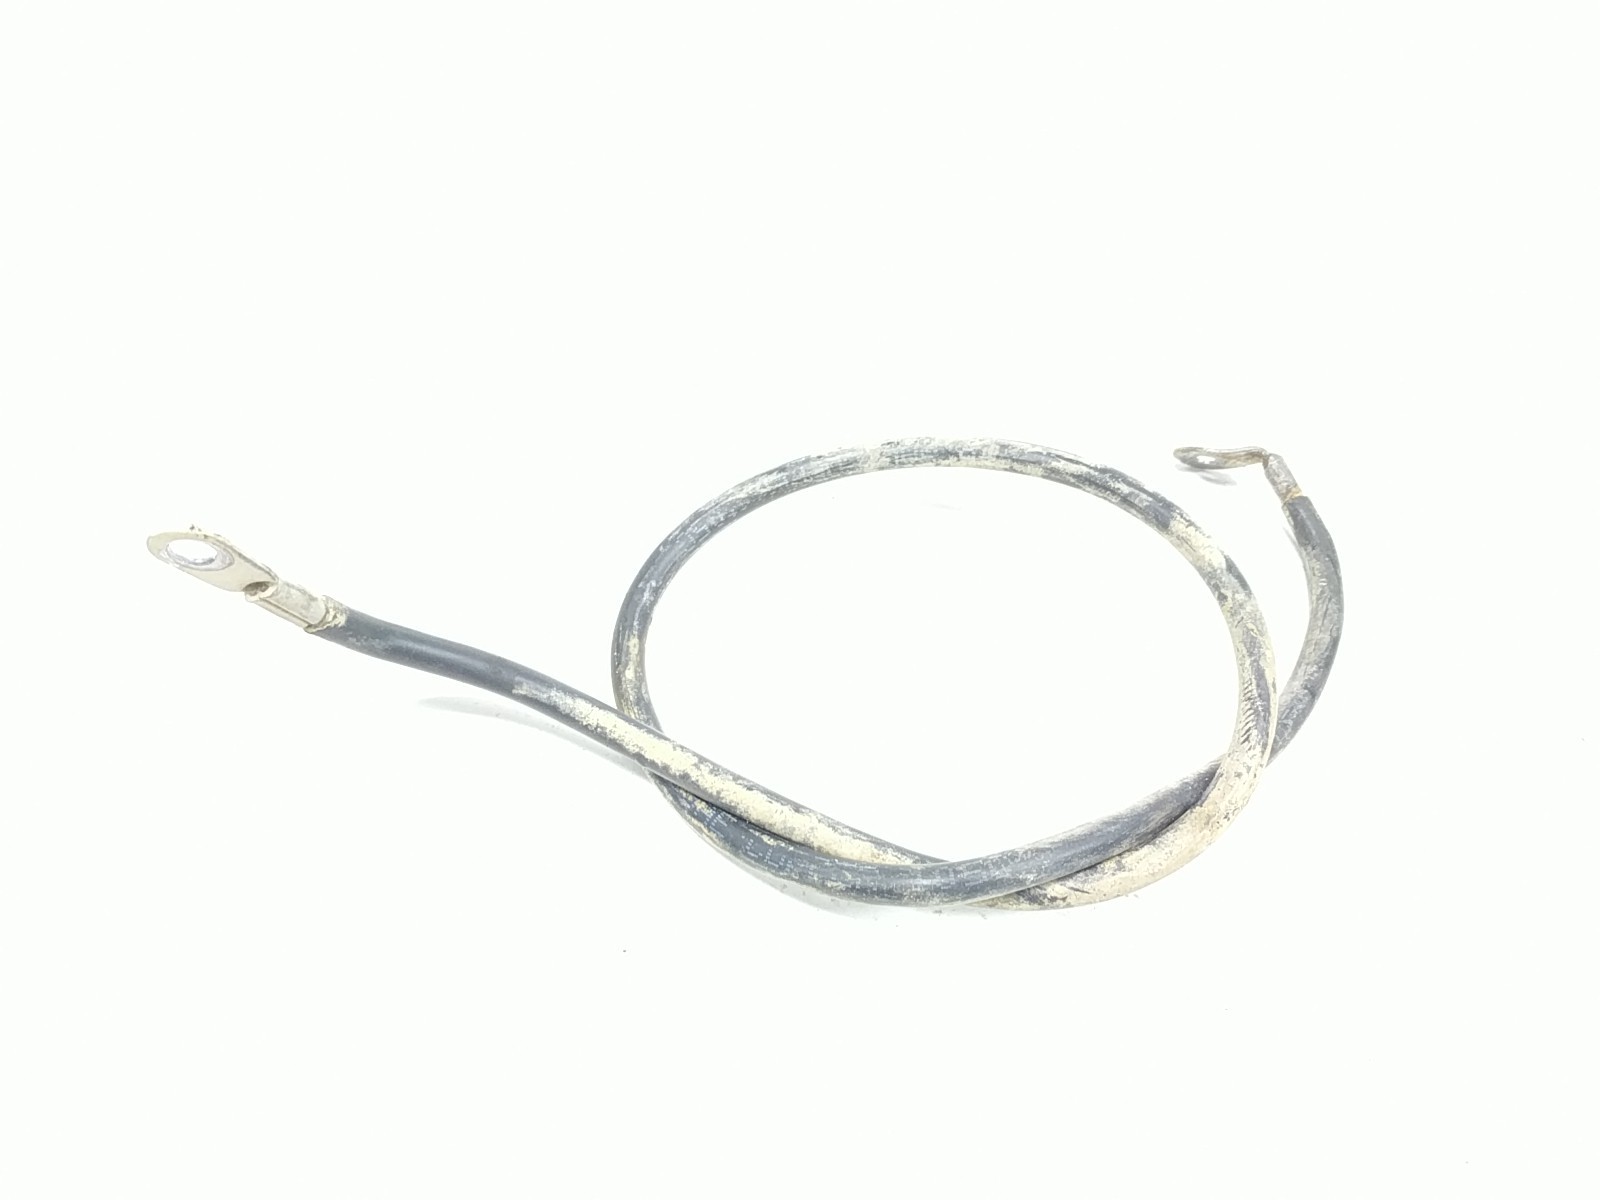 00 01 02 Polaris Xpedition 325 Negative Battery Wire Cable Lines